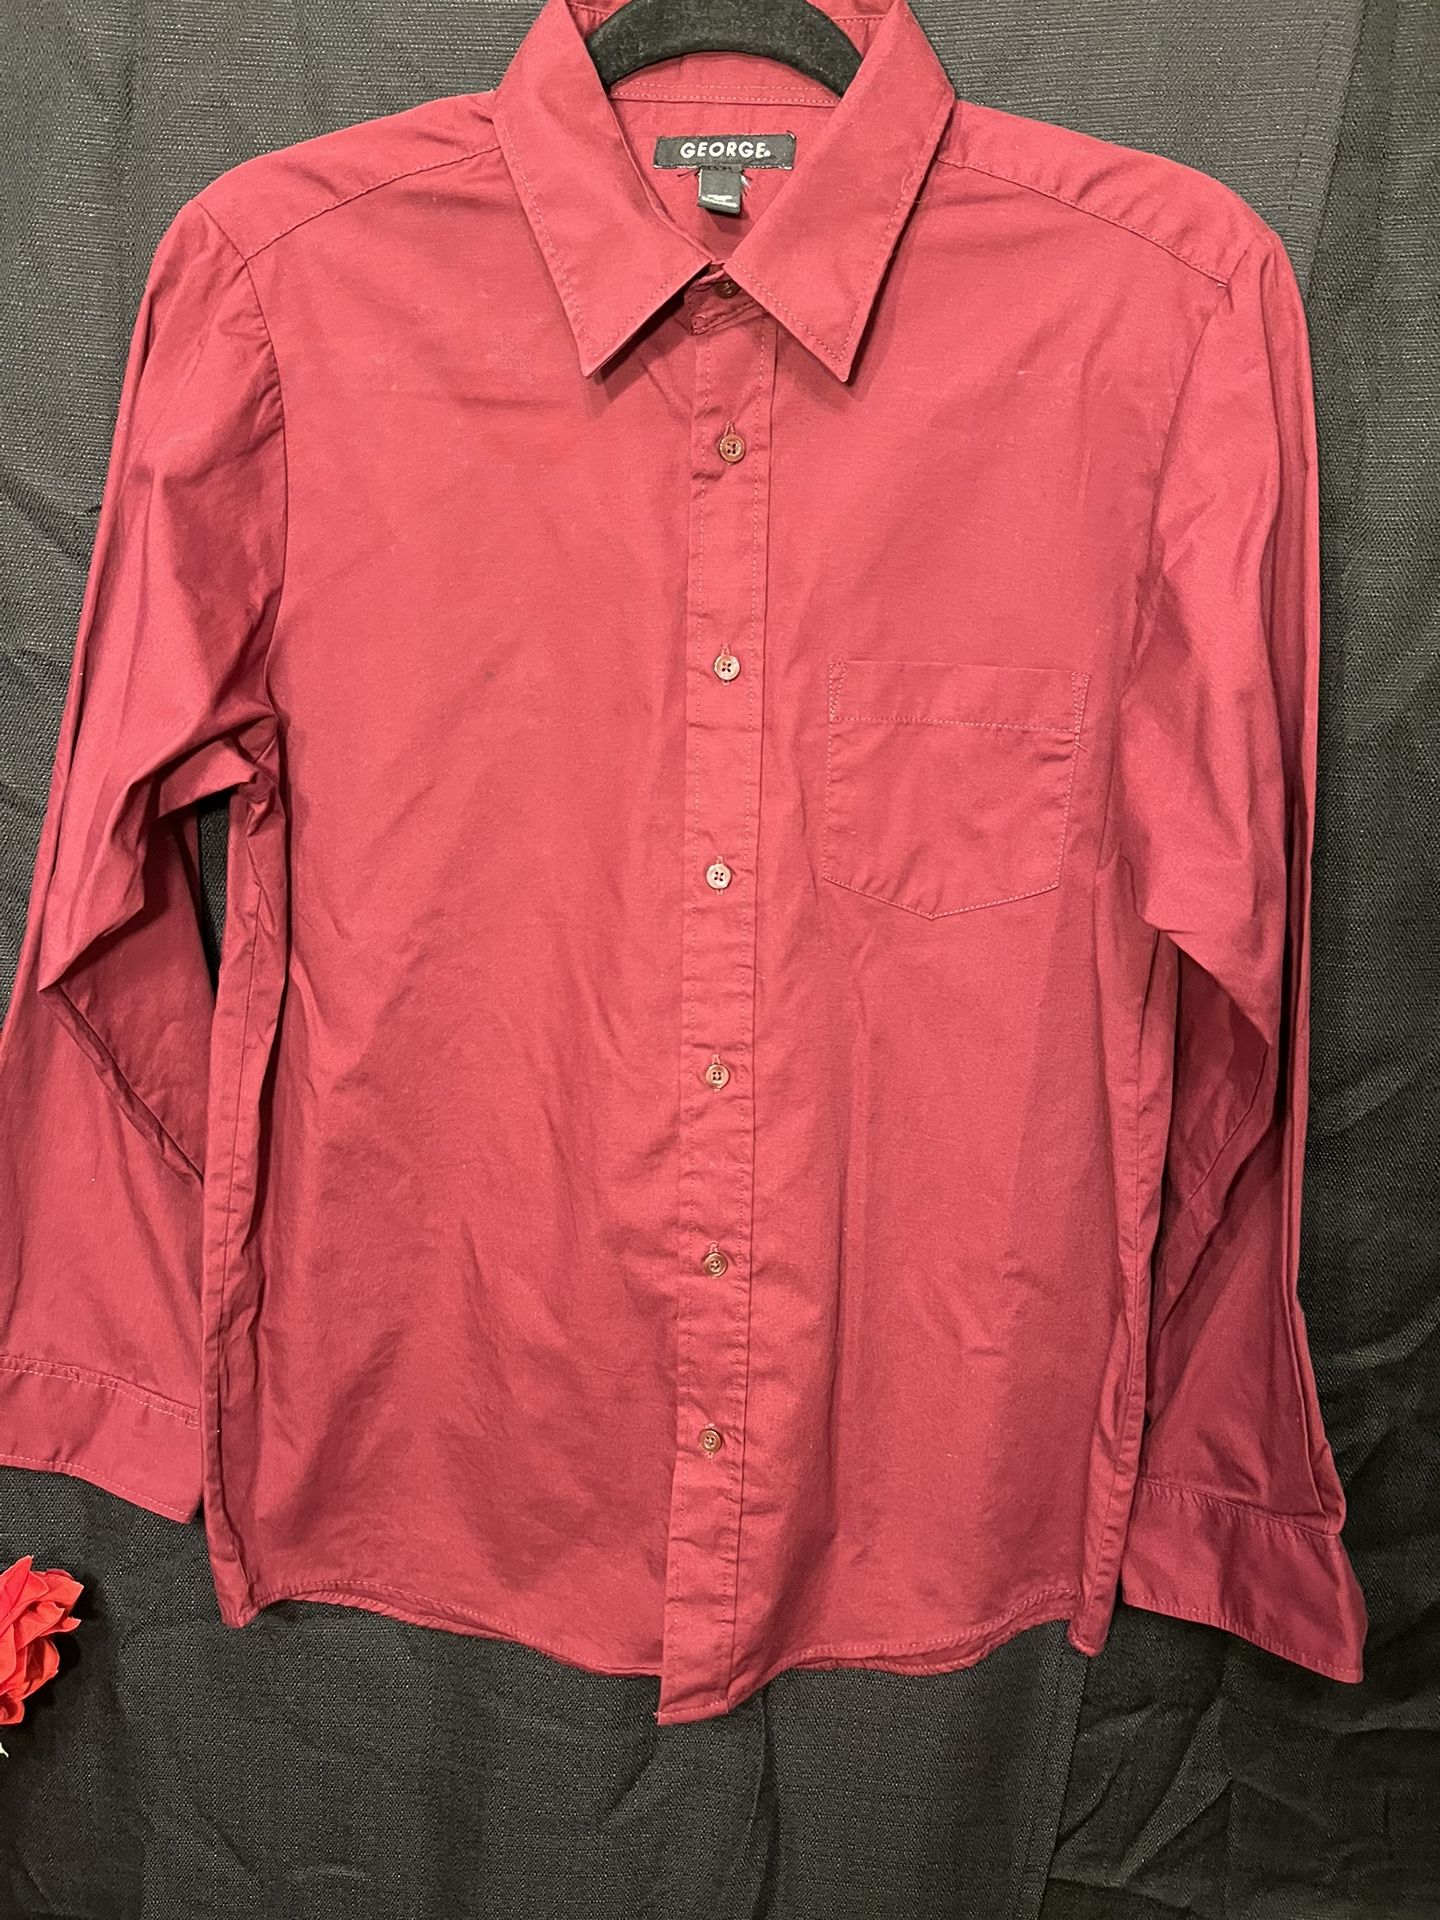 George Youth Boy XXL (18H) Red Button Up Lightweight Casual Shirt